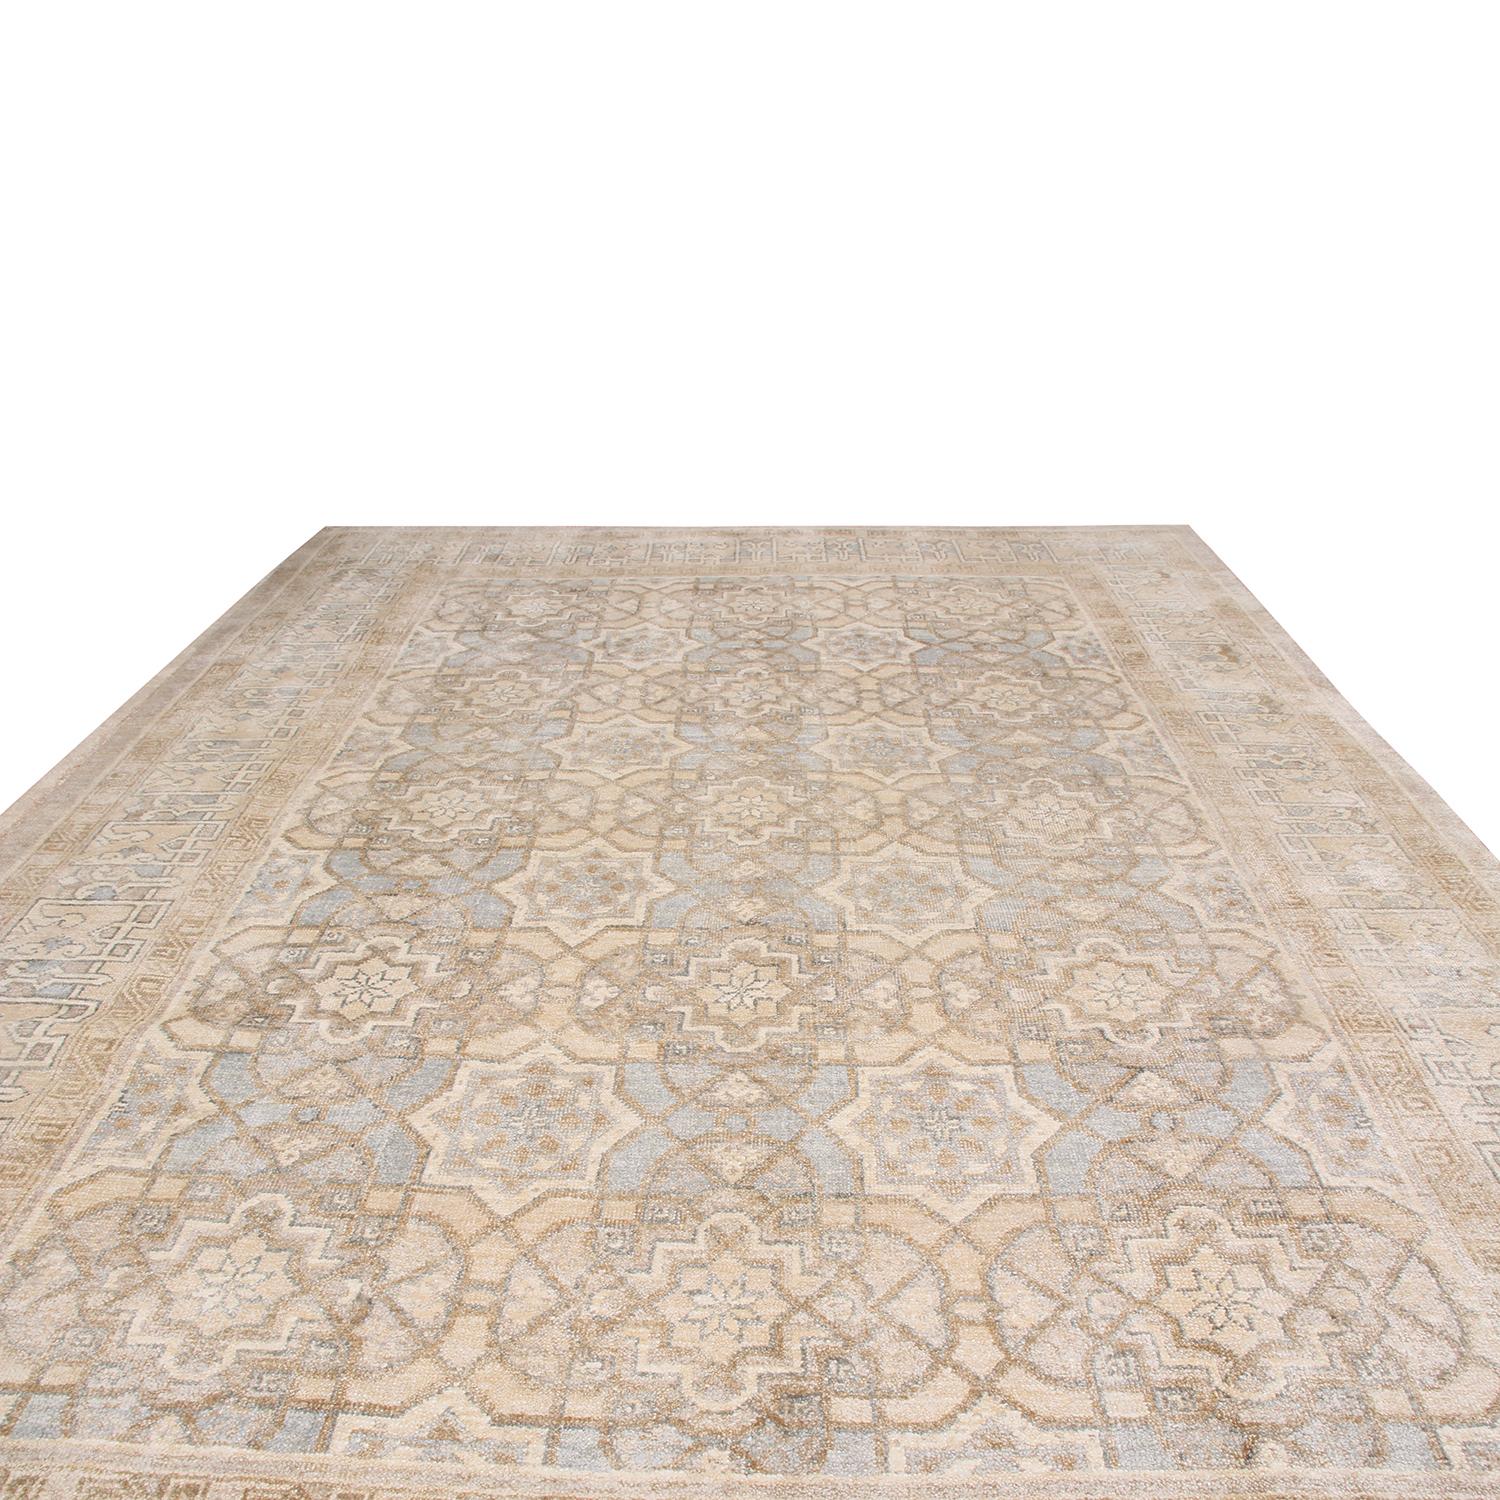 Hand knotted in high-quality wool with accenting, luminous silk originating from India, this Oushak rug enjoys an attentive but whimsical field pattern, expanding with an intricate distribution of the artisanal brown, beige, and sky blue colorways